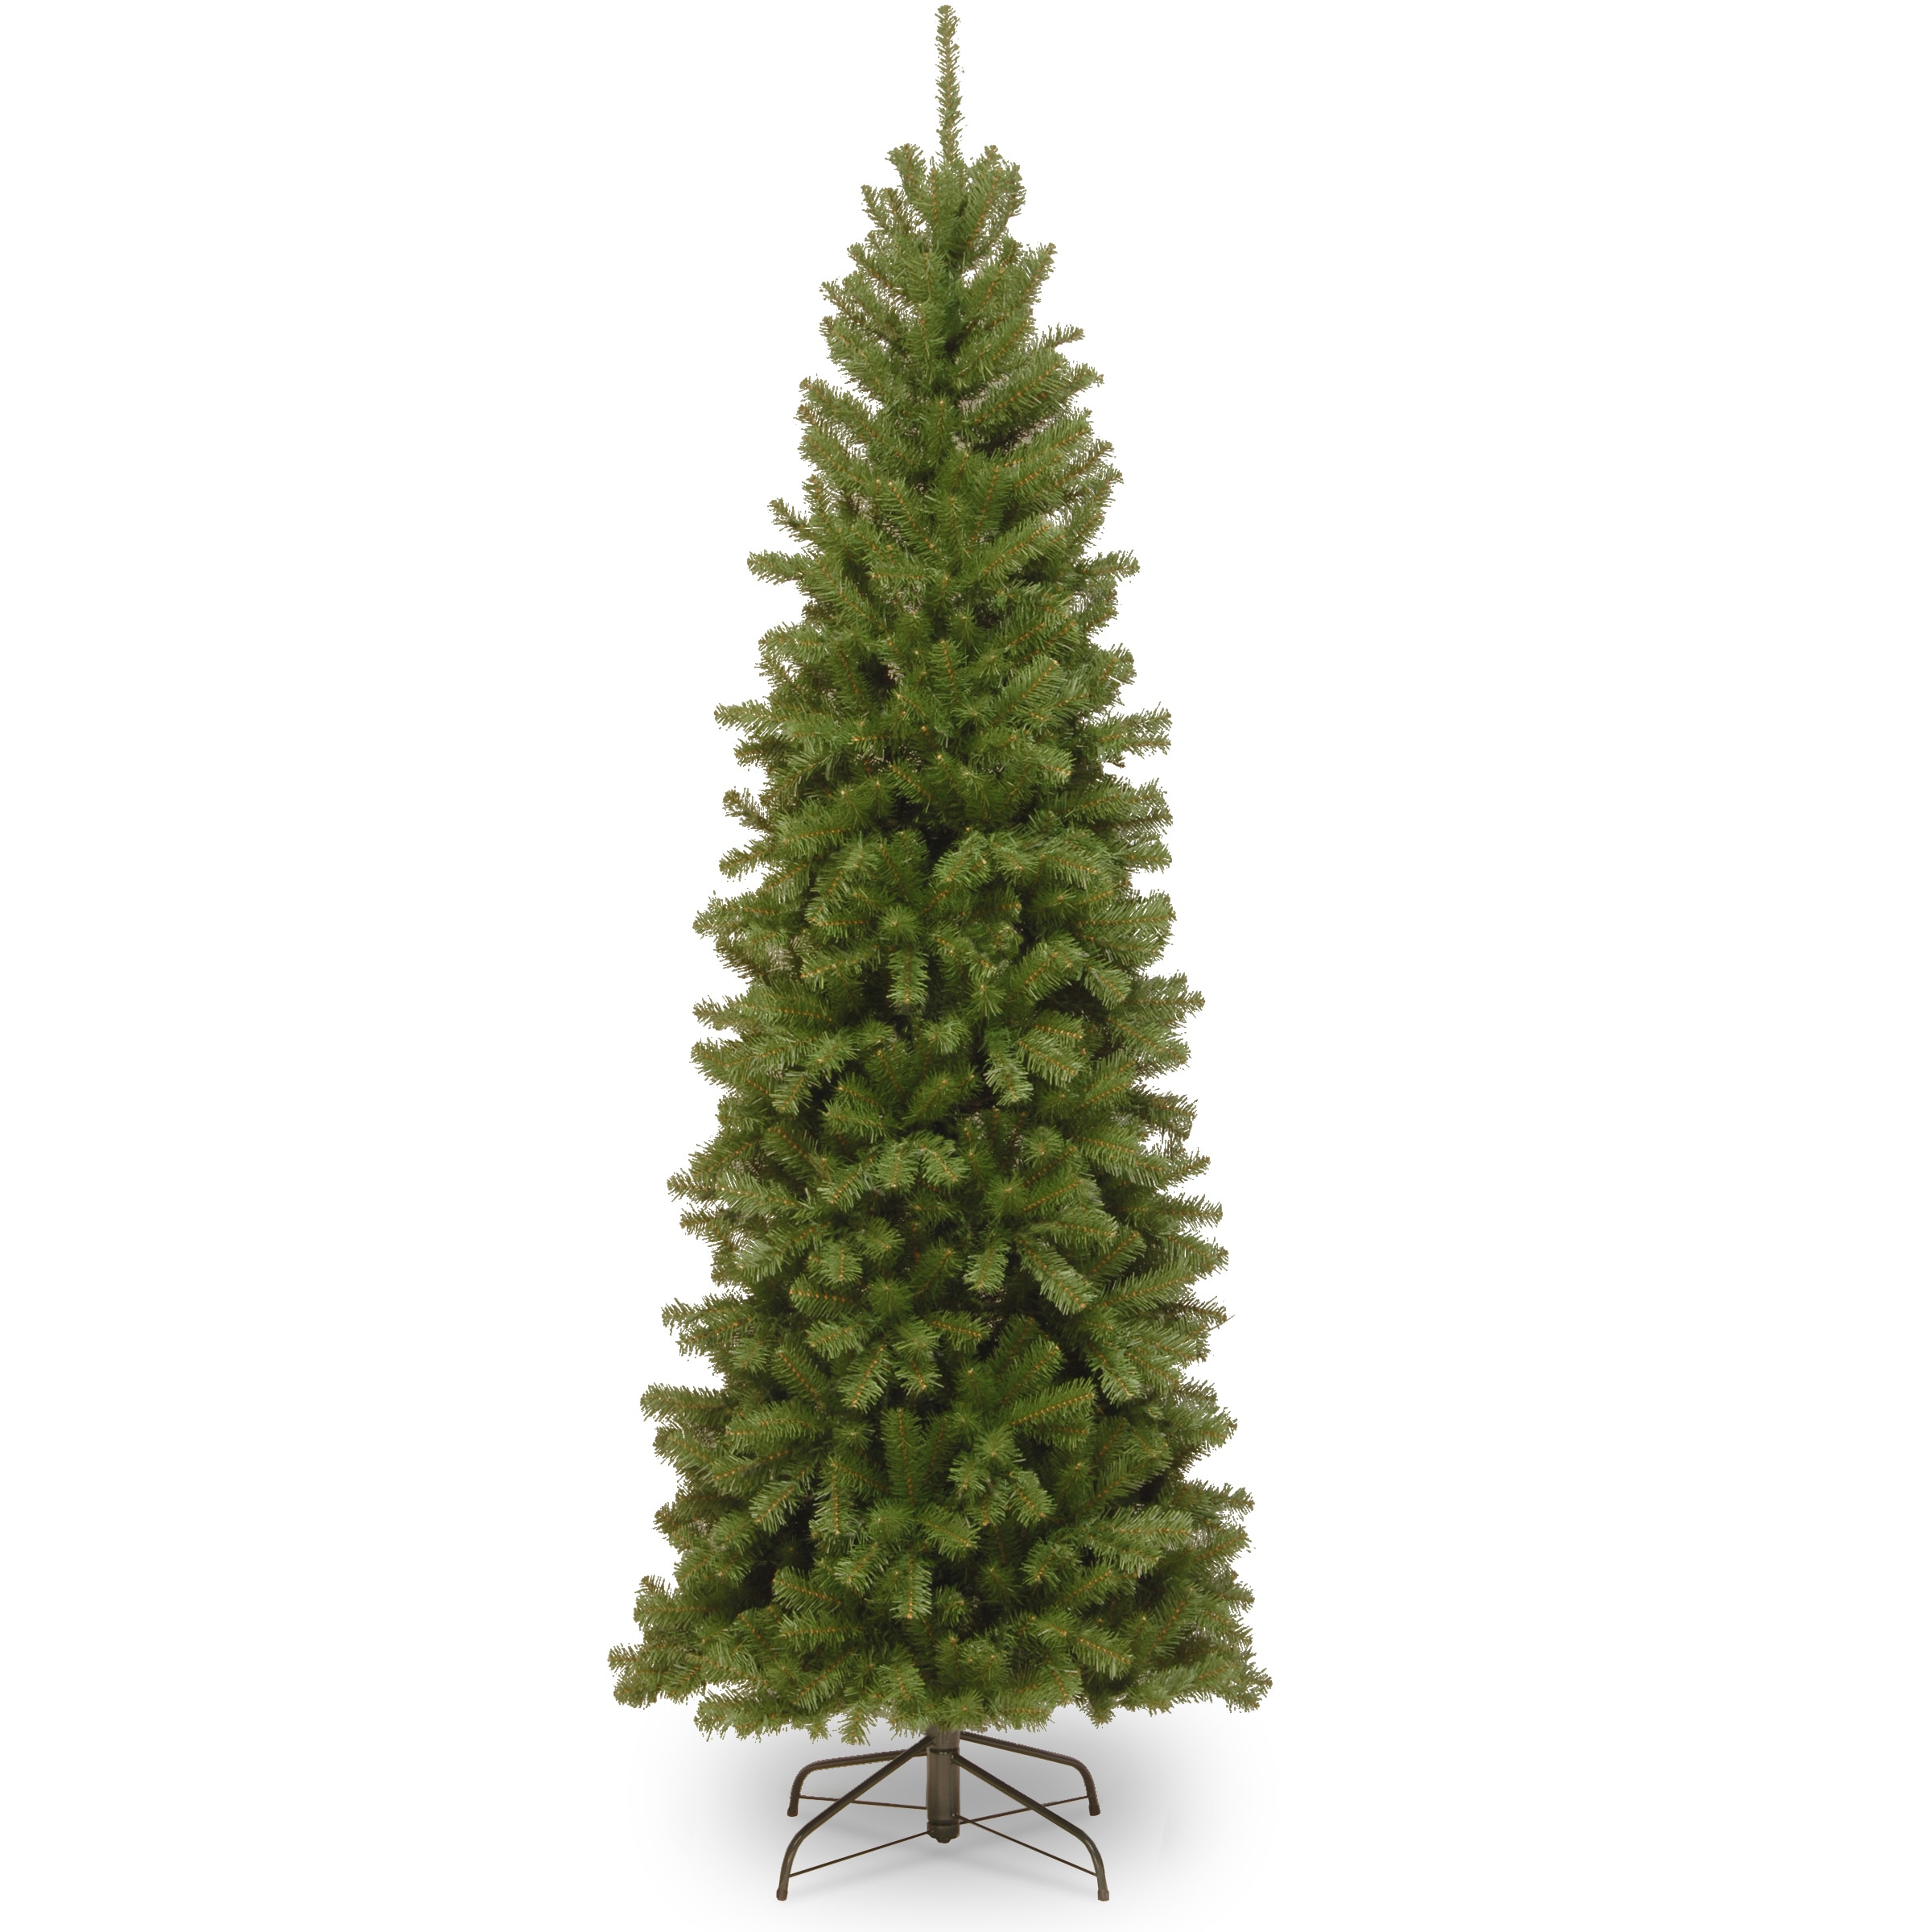 1 Pack Christmas Trees at